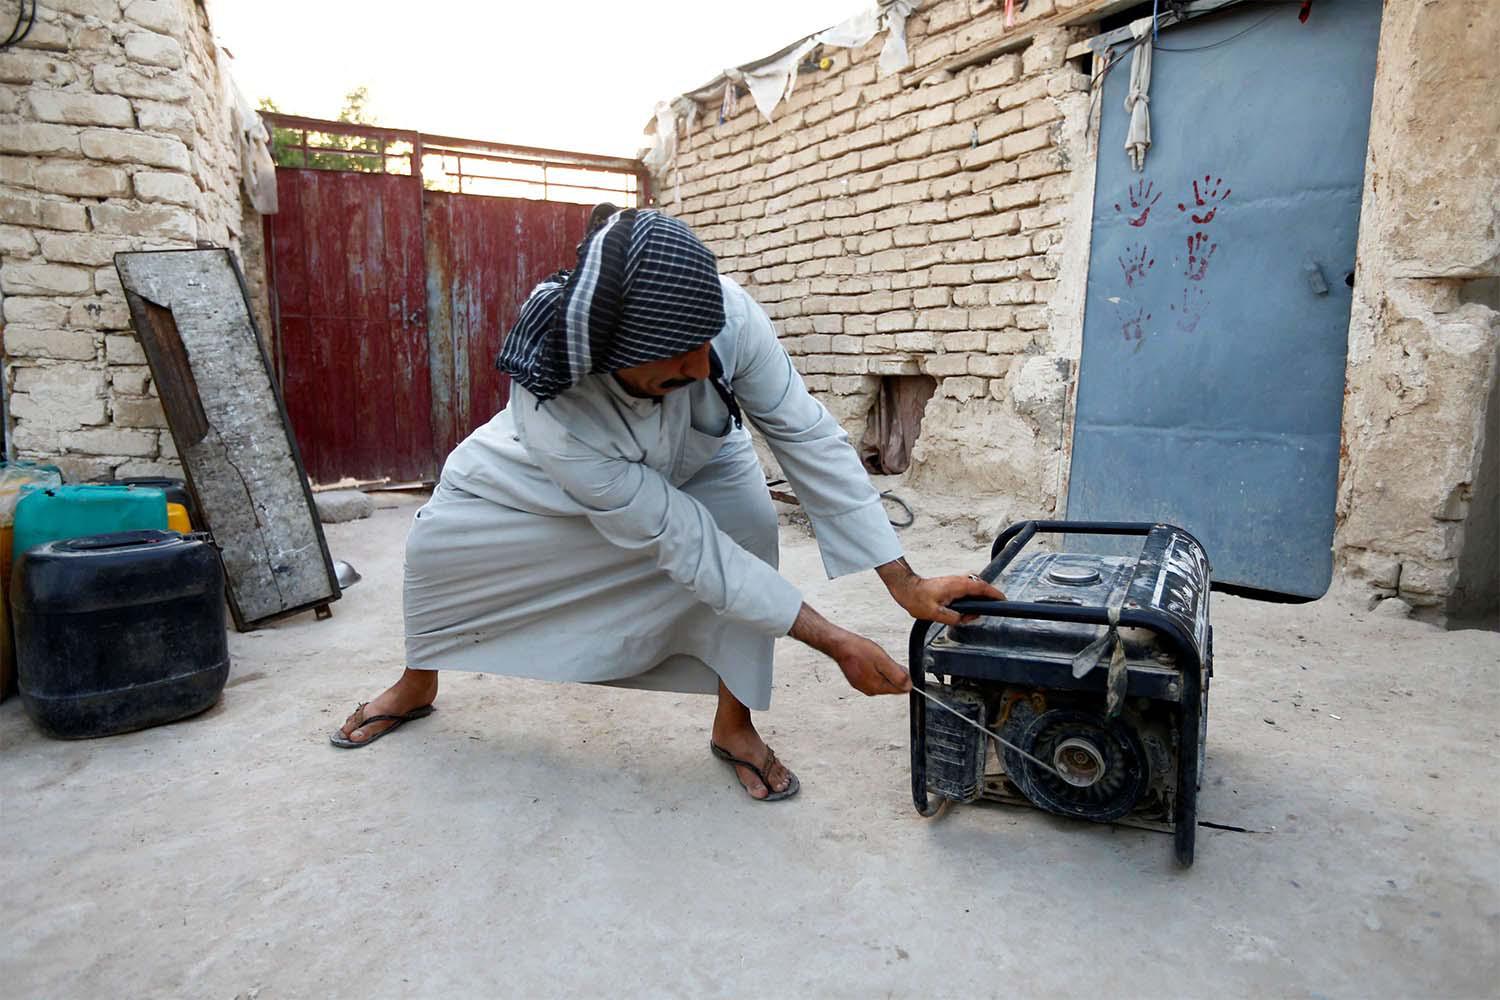 Electrical generator to cope with the scorching heatwave in Iraq